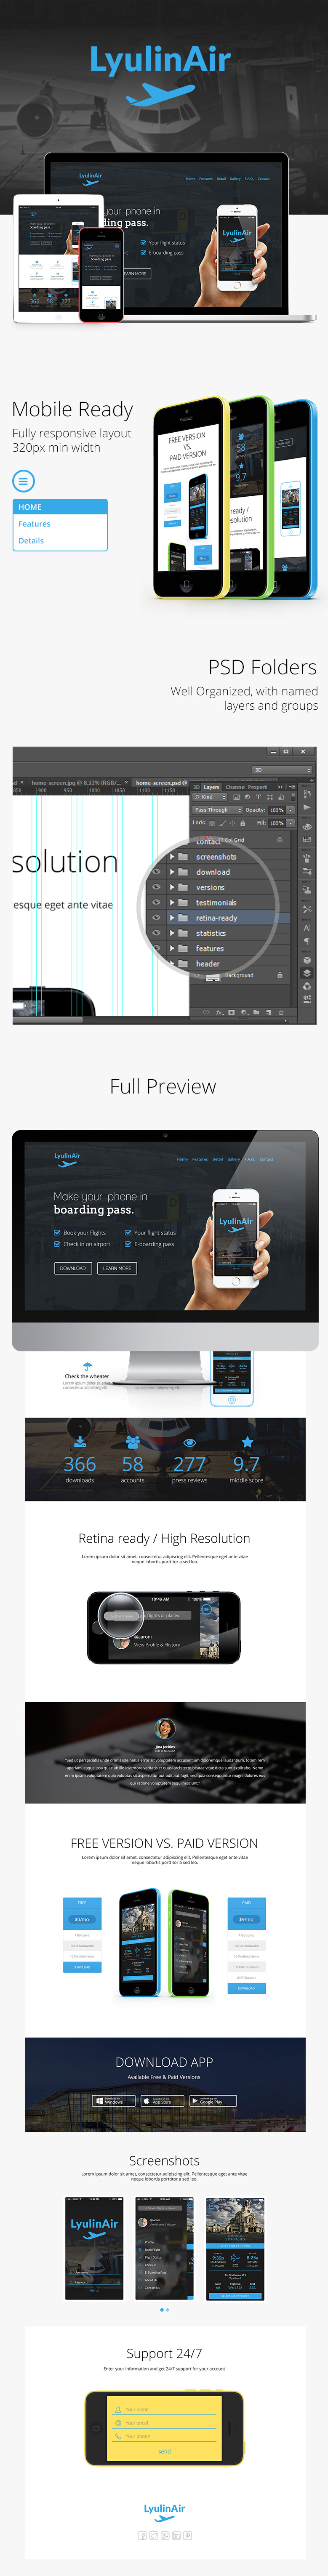 air flybi airport One Page landing page parallax landing page parallax landing lyulinair lyulin liulin